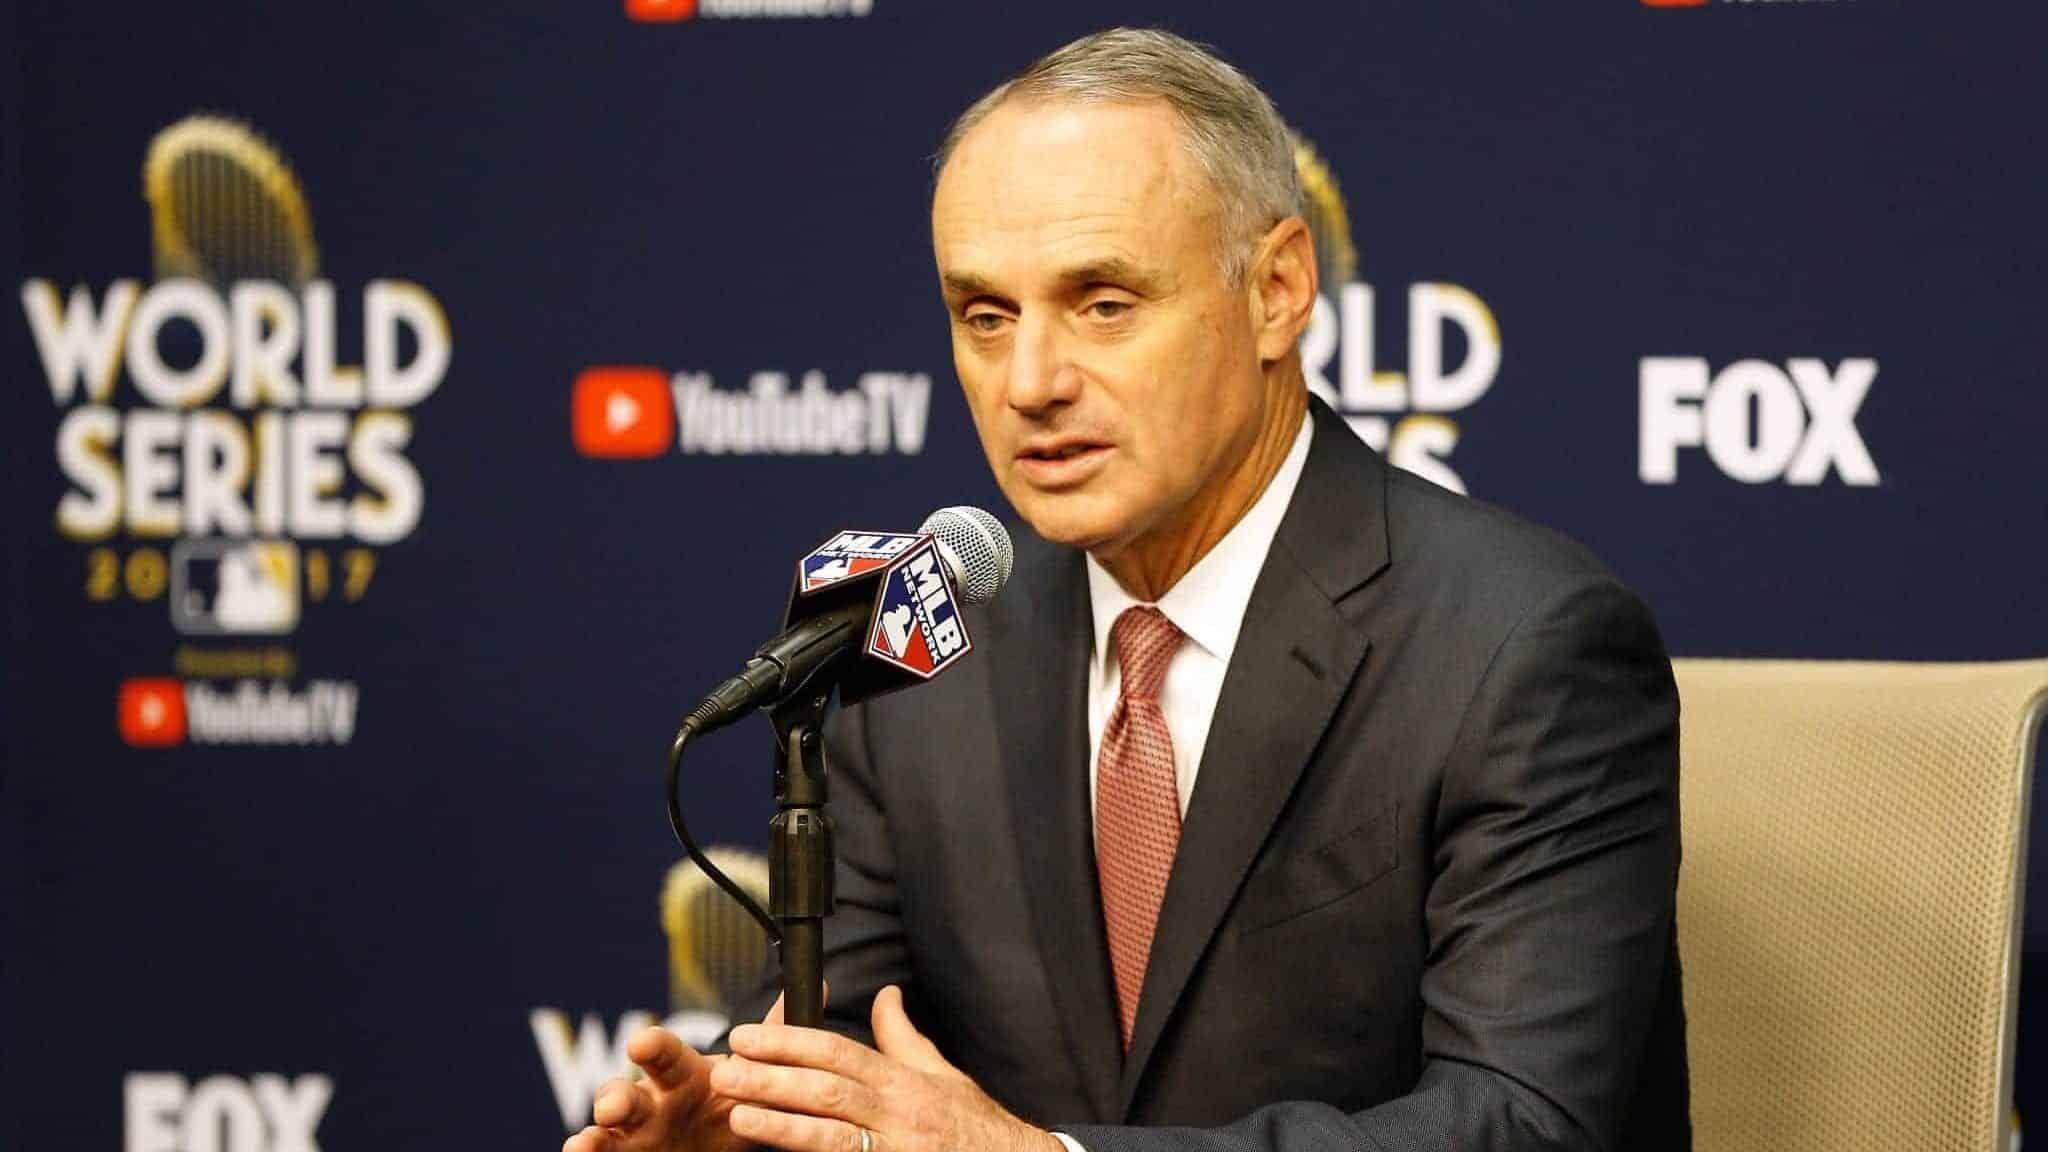 HOUSTON, TX - OCTOBER 28: Major League Baseball Commissioner Robert D. Manfred Jr. speaks to the media during a press conference prior to game four of the 2017 World Series between the Houston Astros and the Los Angeles Dodgers at Minute Maid Park on October 28, 2017 in Houston, Texas.